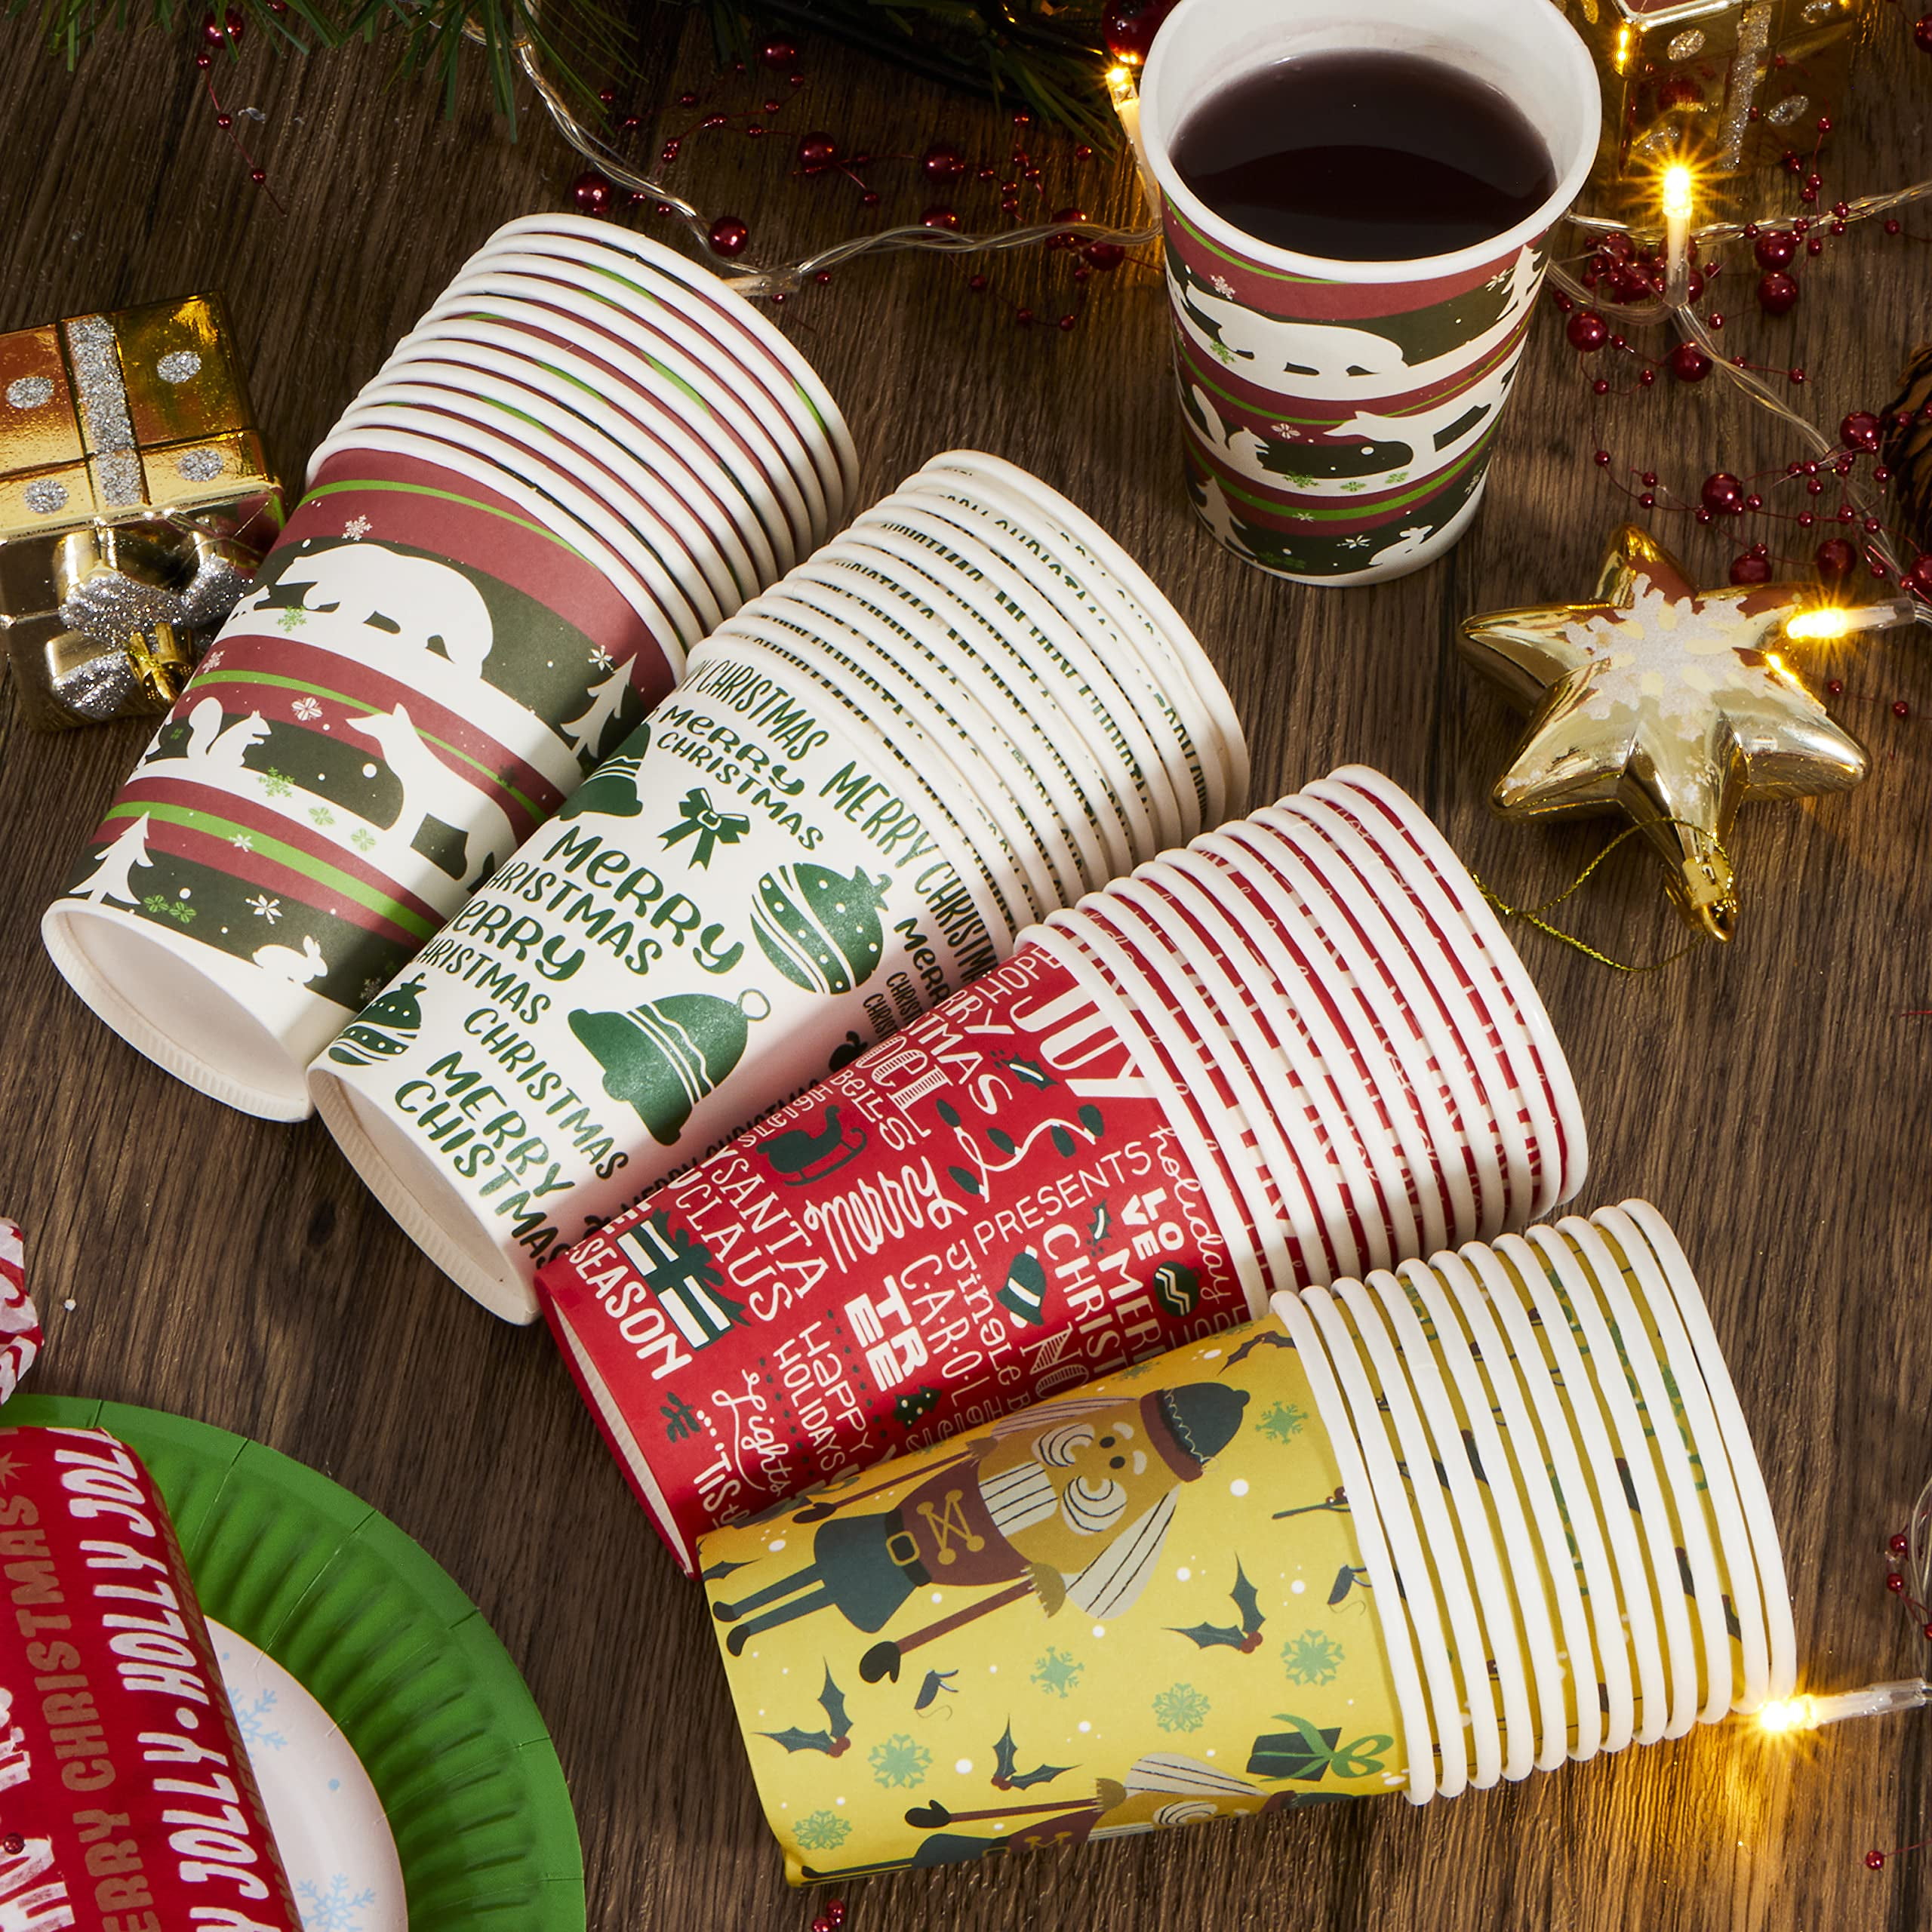 Sieral 144 Pcs Christmas Cups 8 oz Holiday Assorted Paper Cups Drinking Tea  Disposable Christmas Cof…See more Sieral 144 Pcs Christmas Cups 8 oz